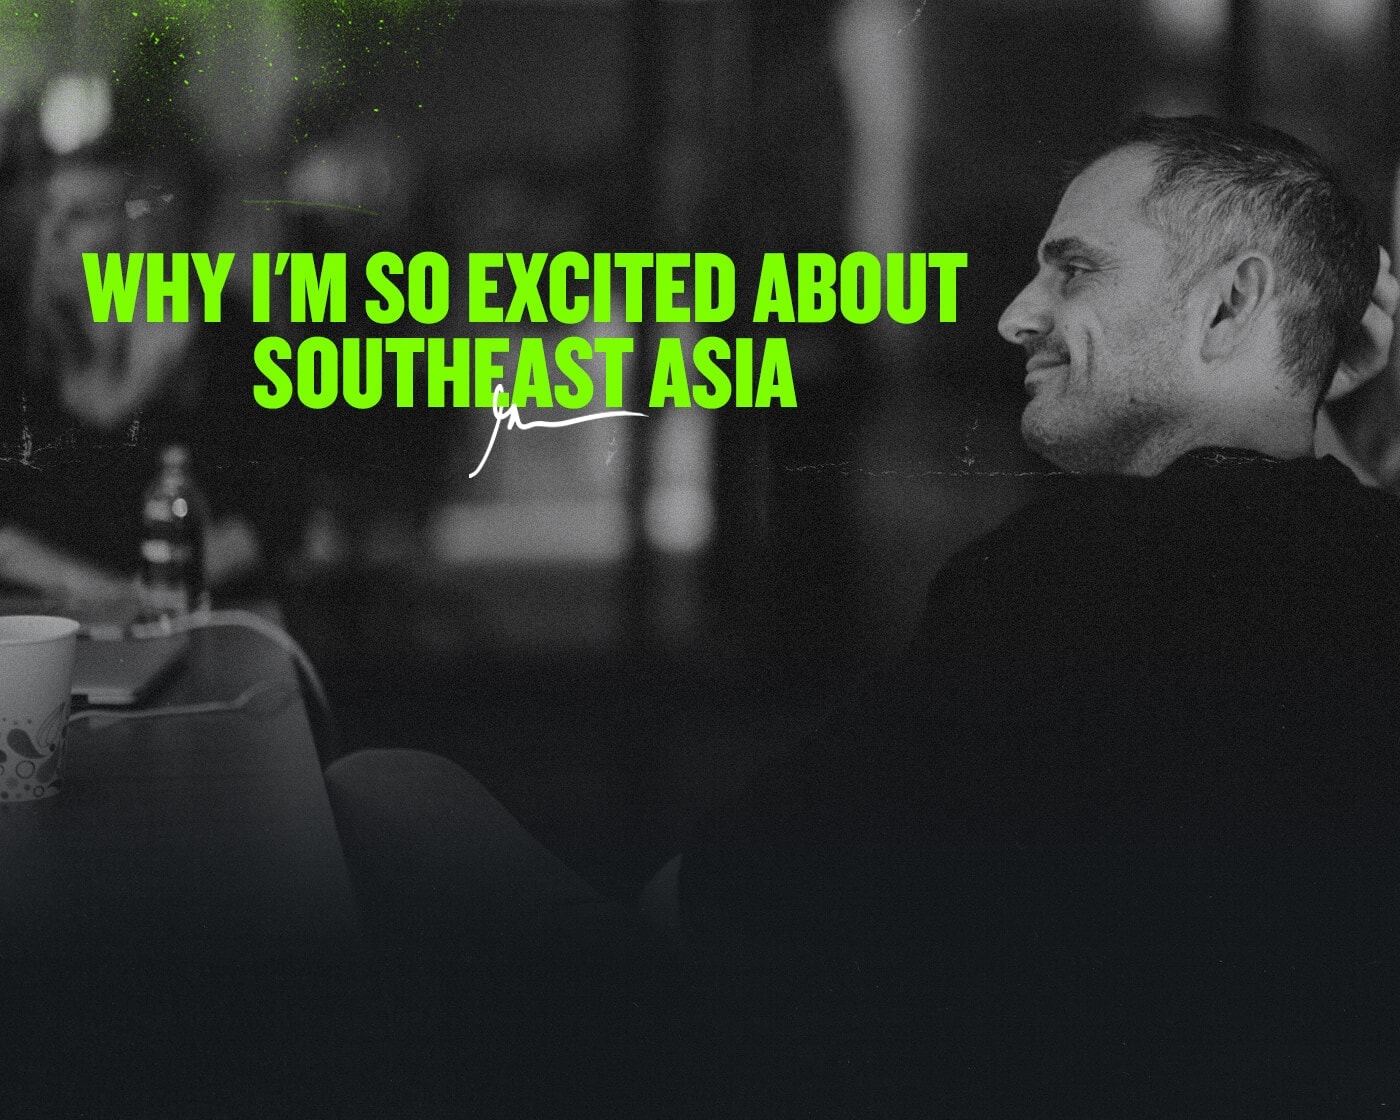 Why I’m So Excited About Entrepreneurship in Southeast Asia